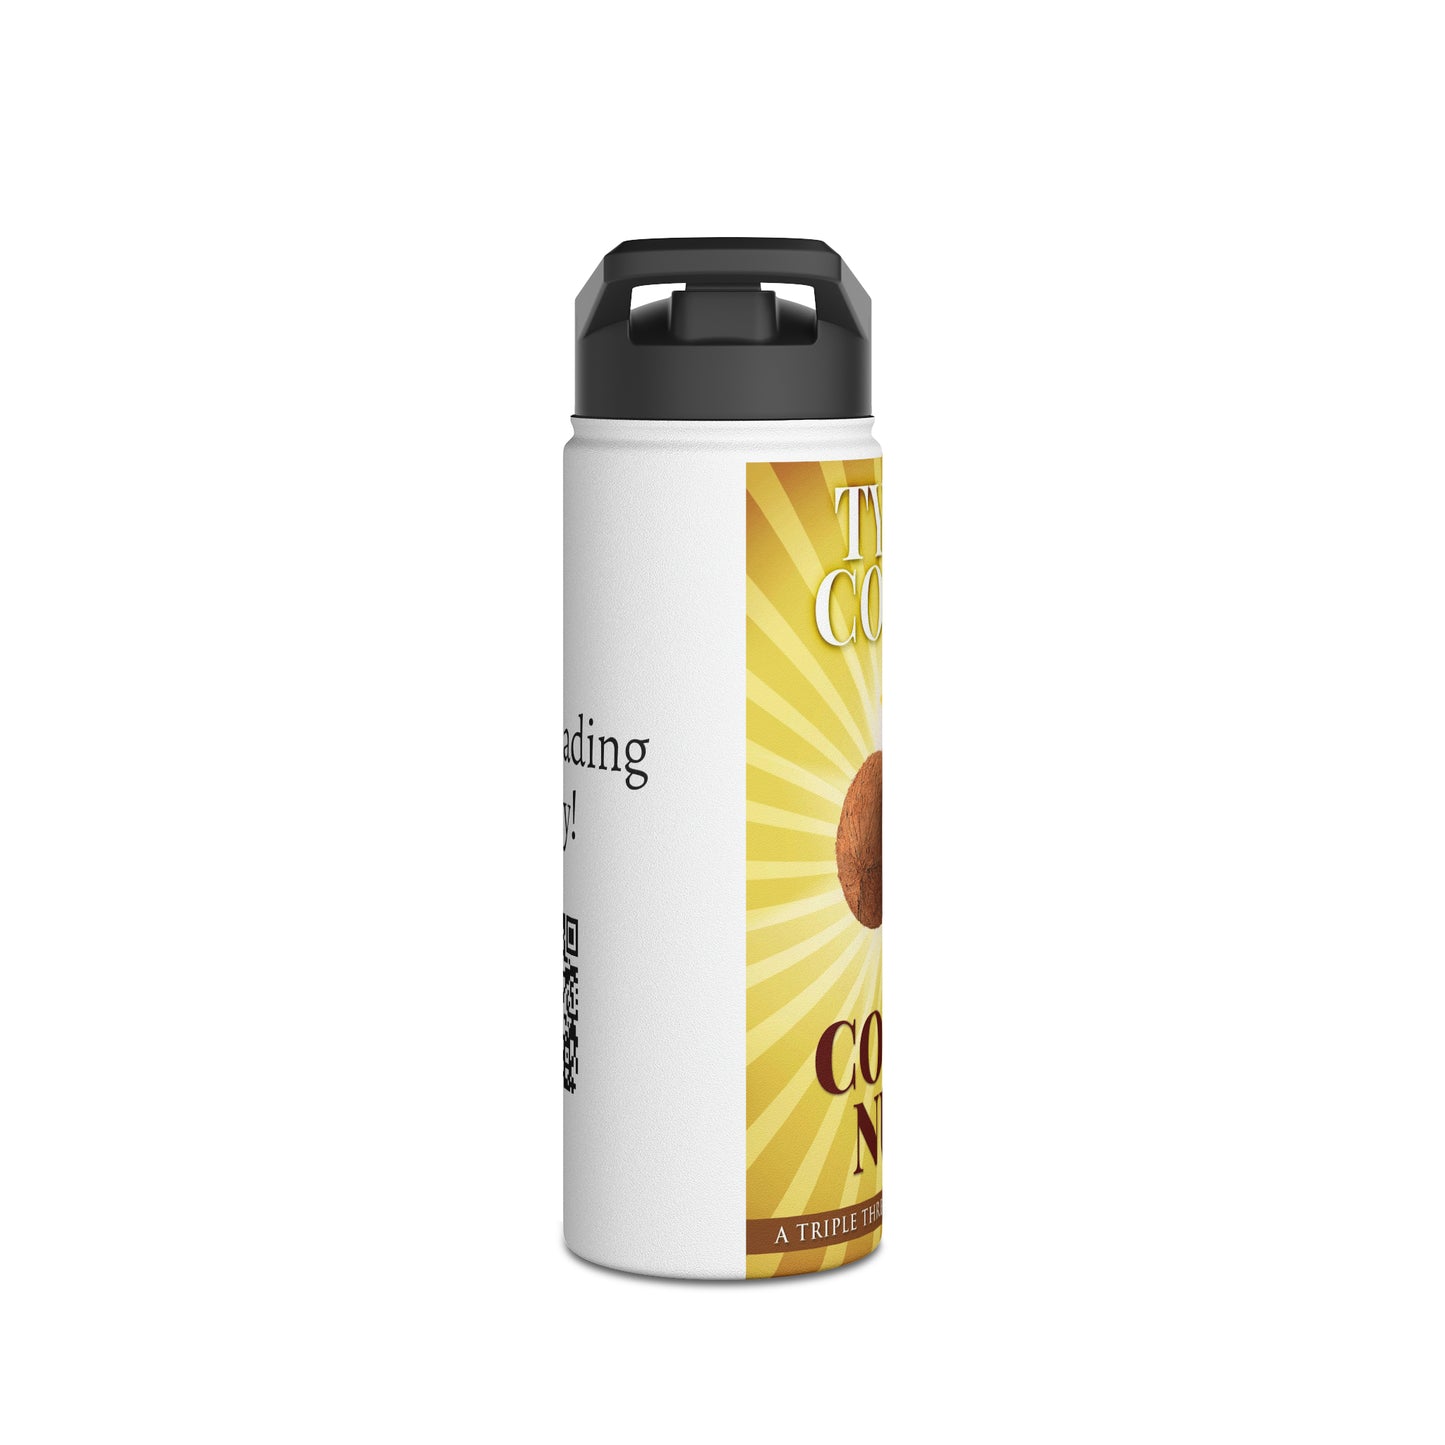 Coco's Nuts - Stainless Steel Water Bottle